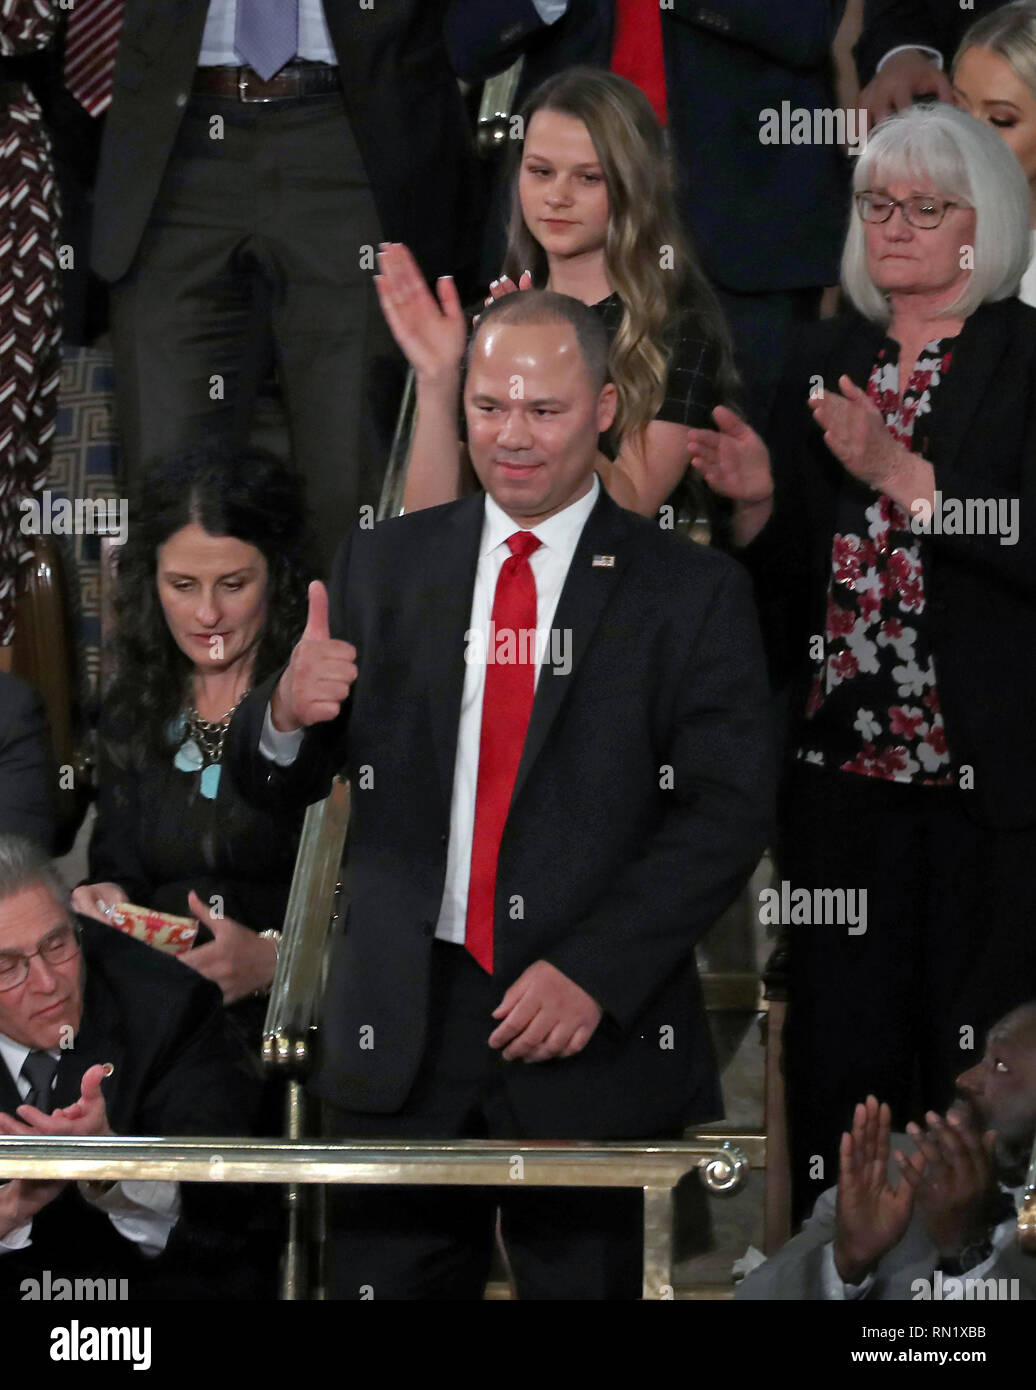 Washington DC, USA. 5th February 2019. Elvin Hernandez, a Special Agent with the Trafficking in Persons Unit of the Department of Homeland Security's Homeland Security Investigations division, acknowledges the audience's applause after being introduced by United States President Donald J. Trump during his second annual State of the Union Address to a joint session of the US Congress in the US Capitol in Washington, DC on Tuesday, February 5, 2019. Pictured behind Mr. Hernandez, from left to right, are: Heather Armstrong, Madison Armstrong and Debra Bissell. Credit: Alex Edelman/CNP | usage Cre Stock Photo